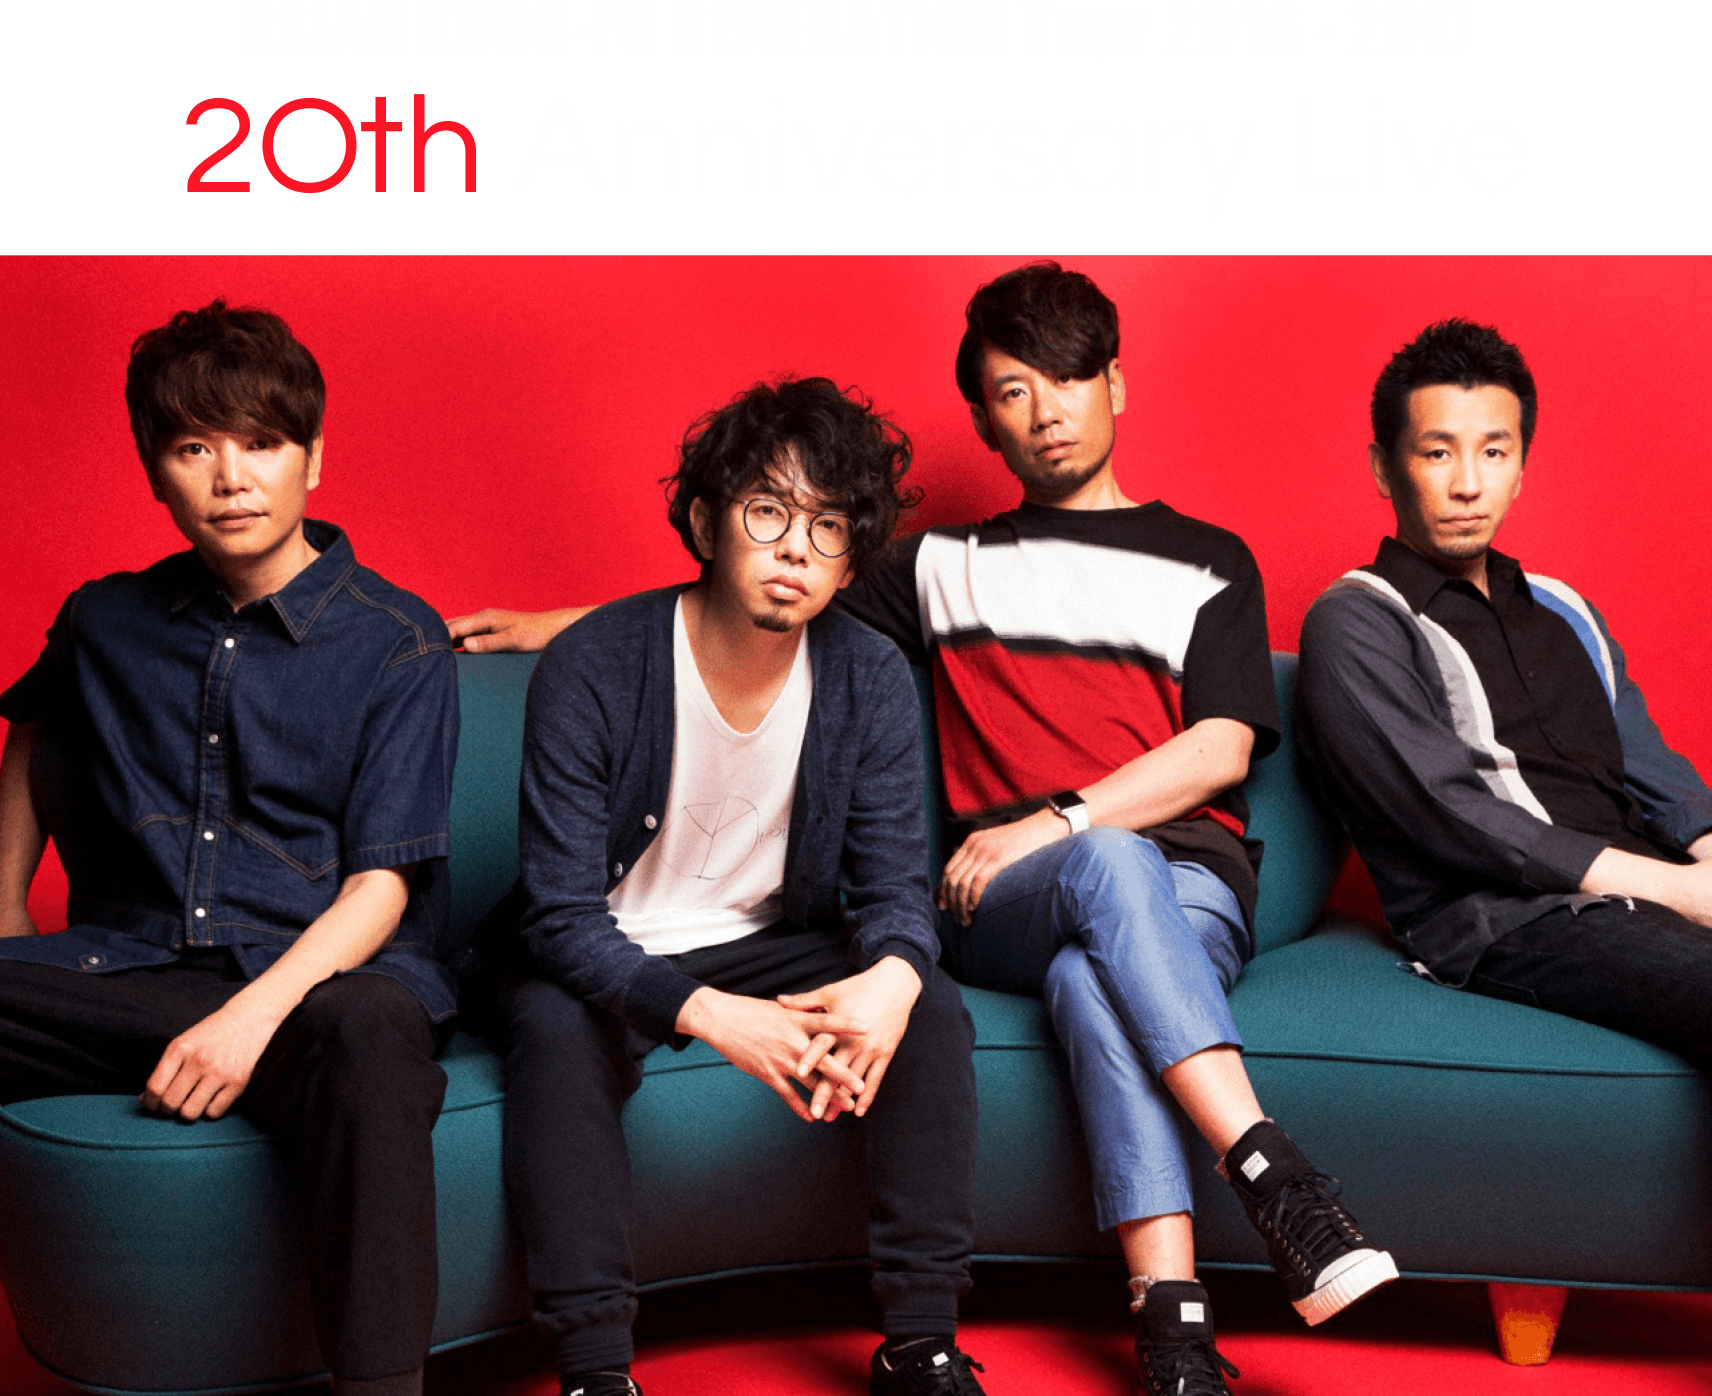 ASIAN KUNG-FU GENERATION Tour 2016 - 2017「20th Anniversary Live」